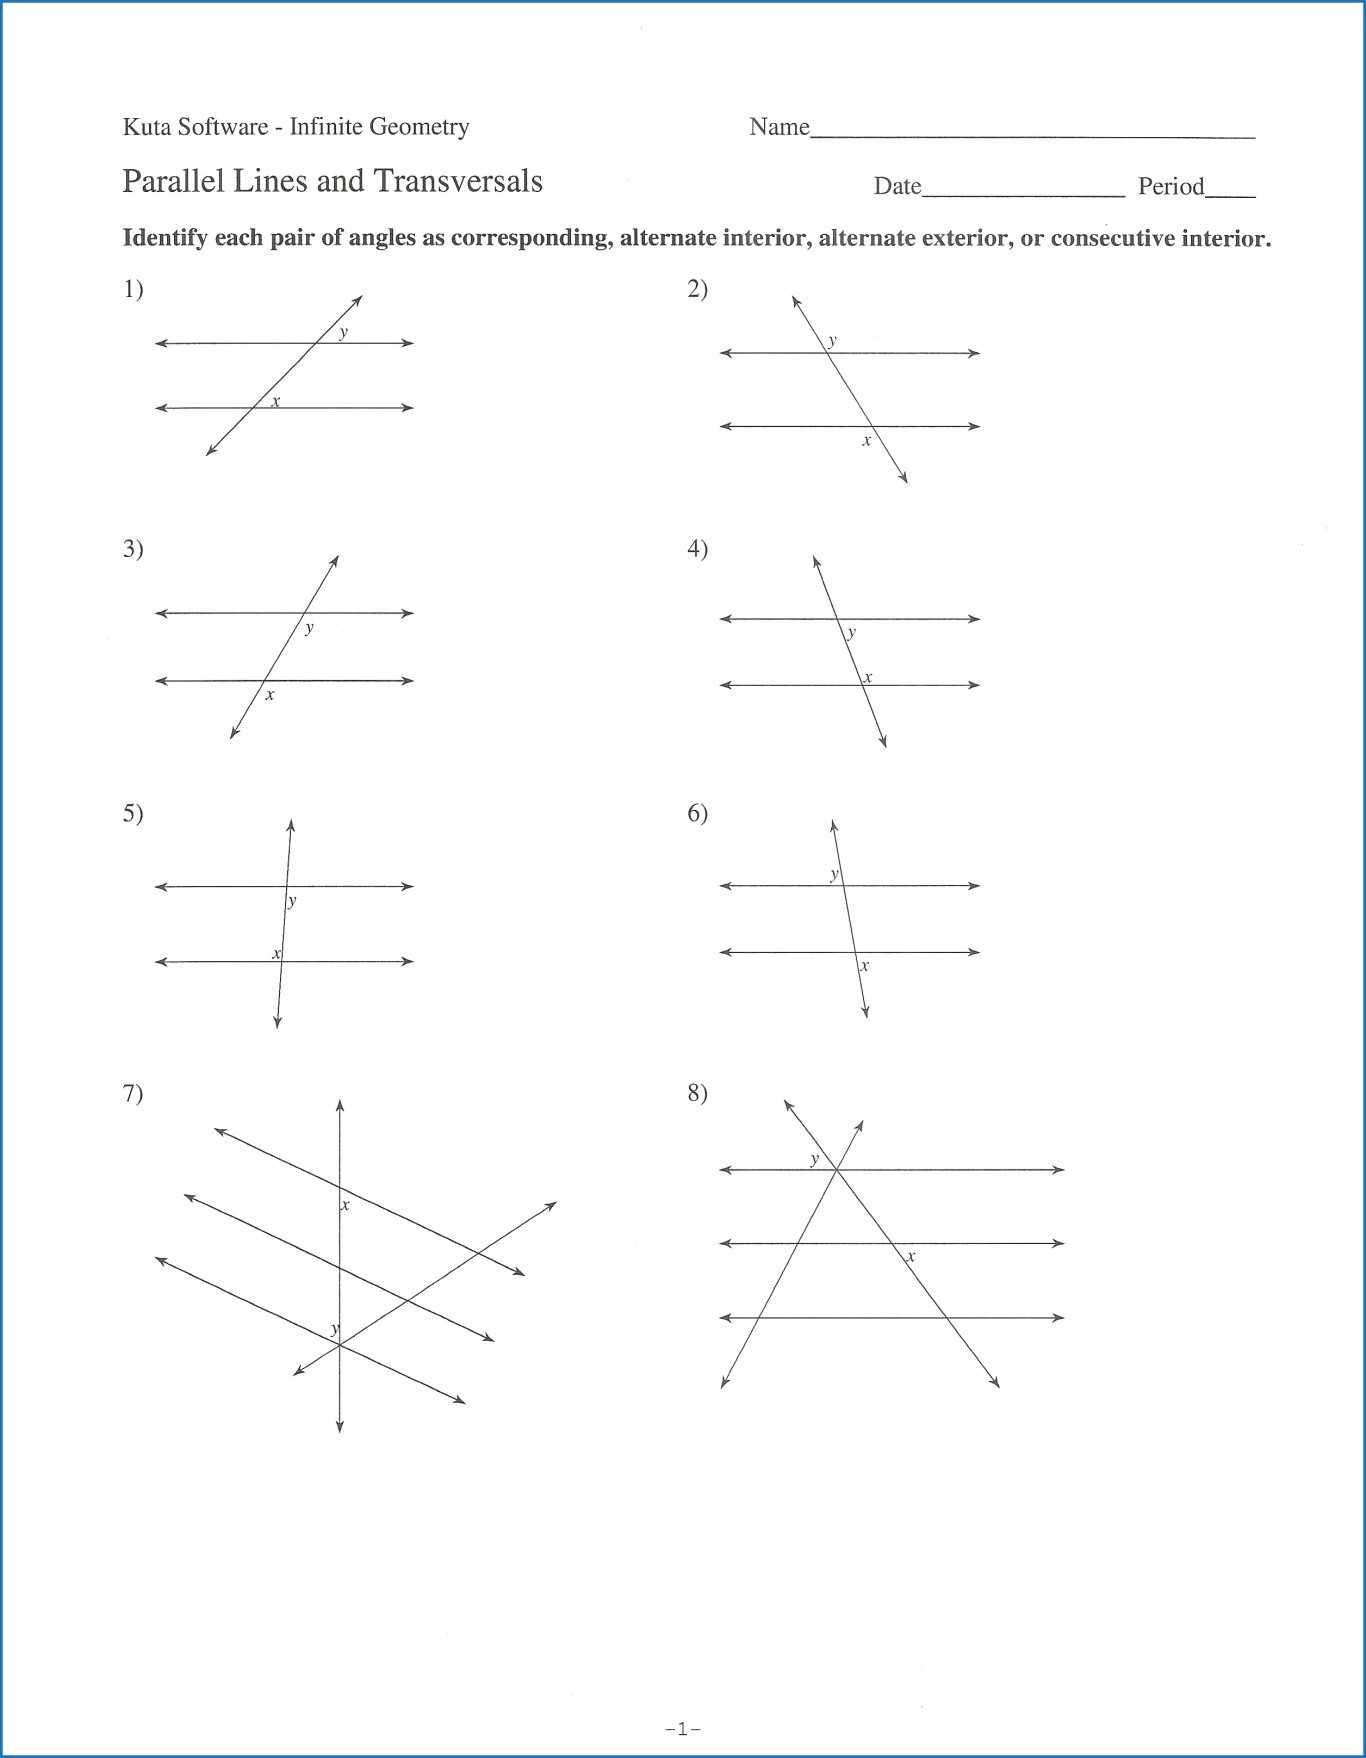 Proving Parallel Lines Worksheet with Answers together with Parallel Lines Cut by A Transversal Worksheet New Parallel Lines